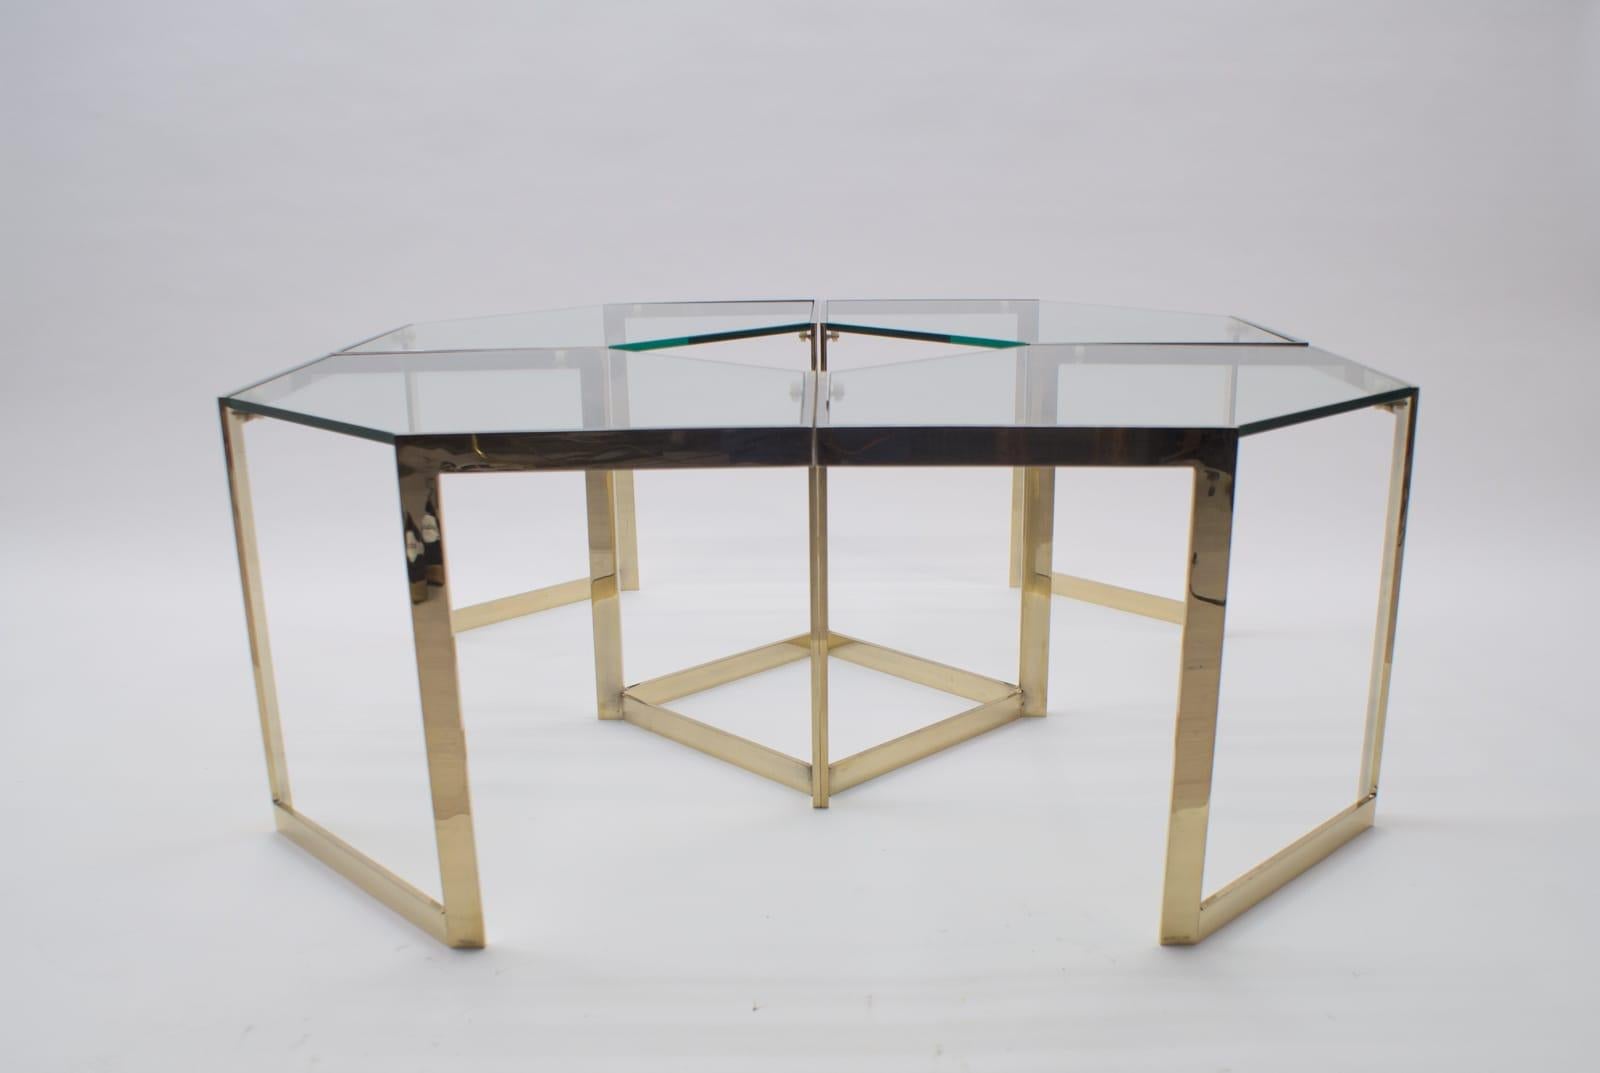 A very elegant set of 4 side tables. The tables can be placed in countless formations. The pictures show only a few possibilities.
Very good, heavy quality. With a natural patina that comes with time. See pictures.
The tables assembled to a coffee